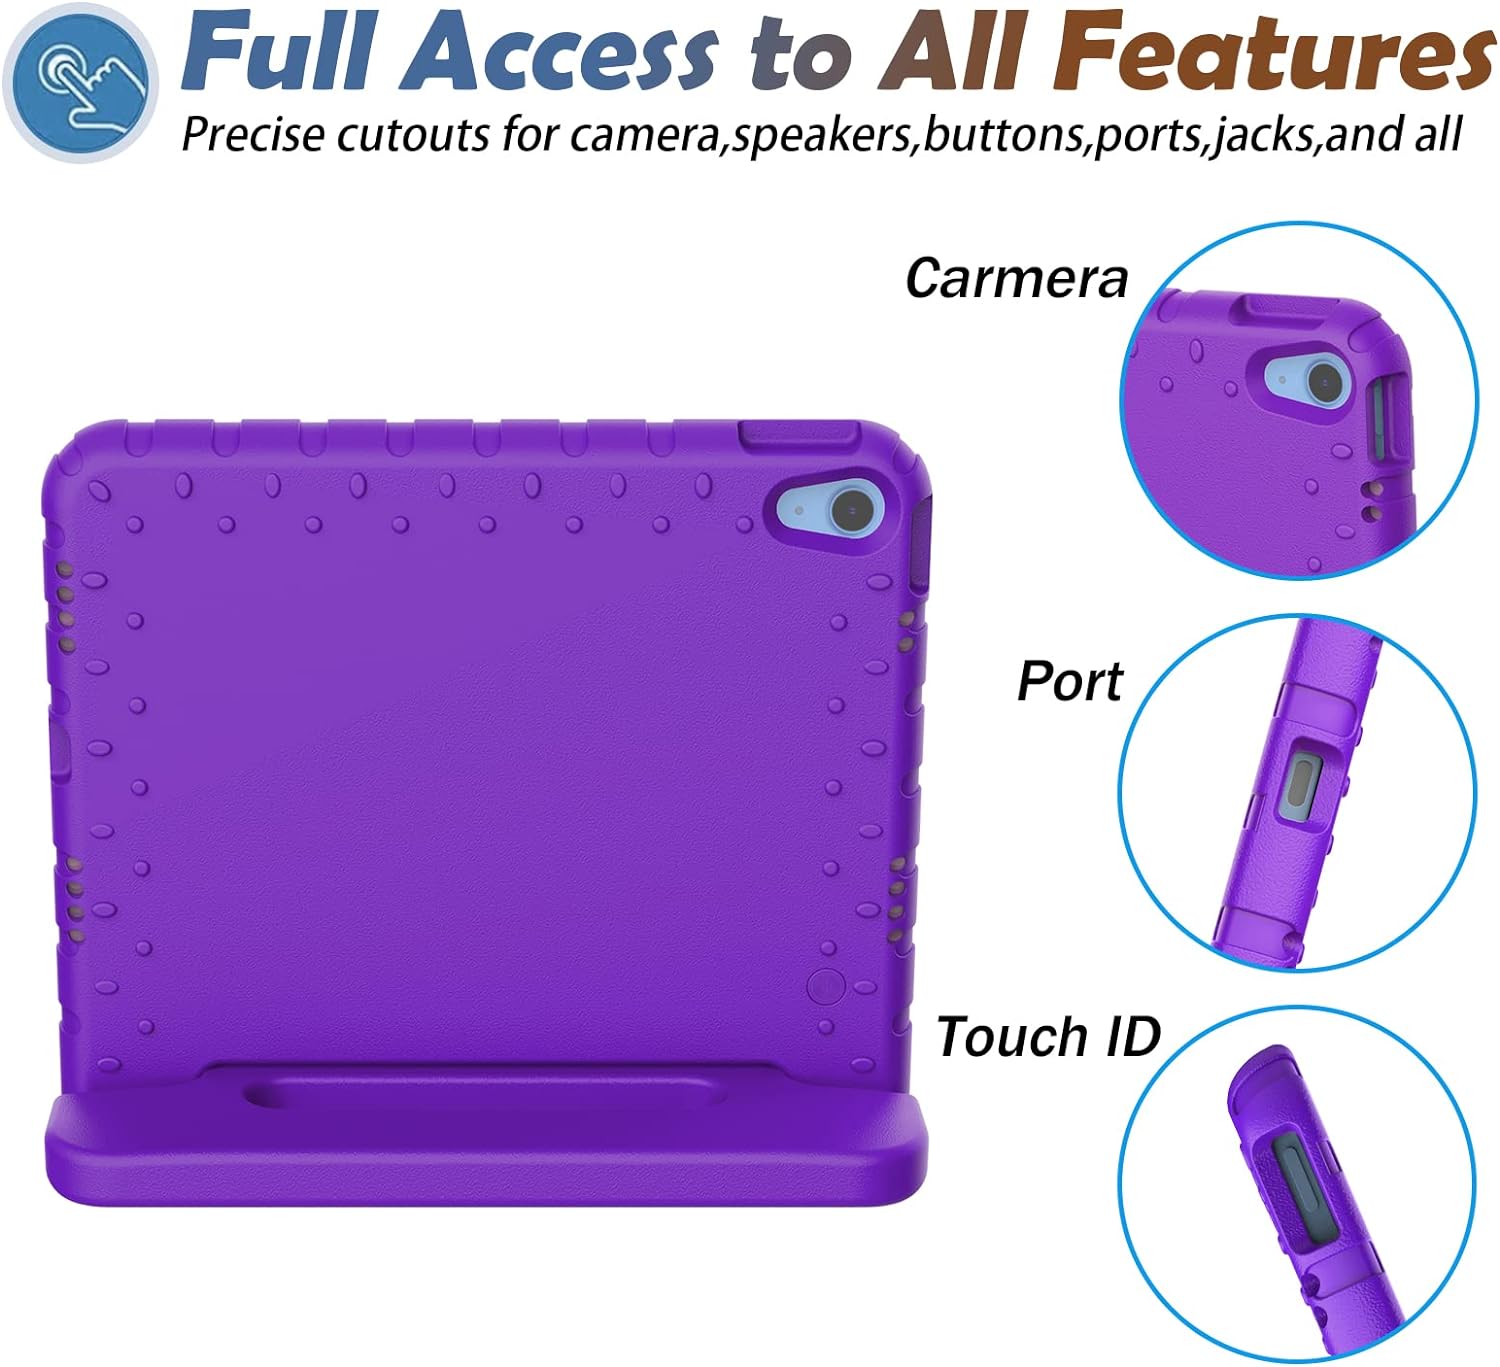 Shockproof Case w Handle & Stand for iPad 9th / 8th / 7th Gen & iPad Air 3 10.5 inch (Purple) *Free Shipping*